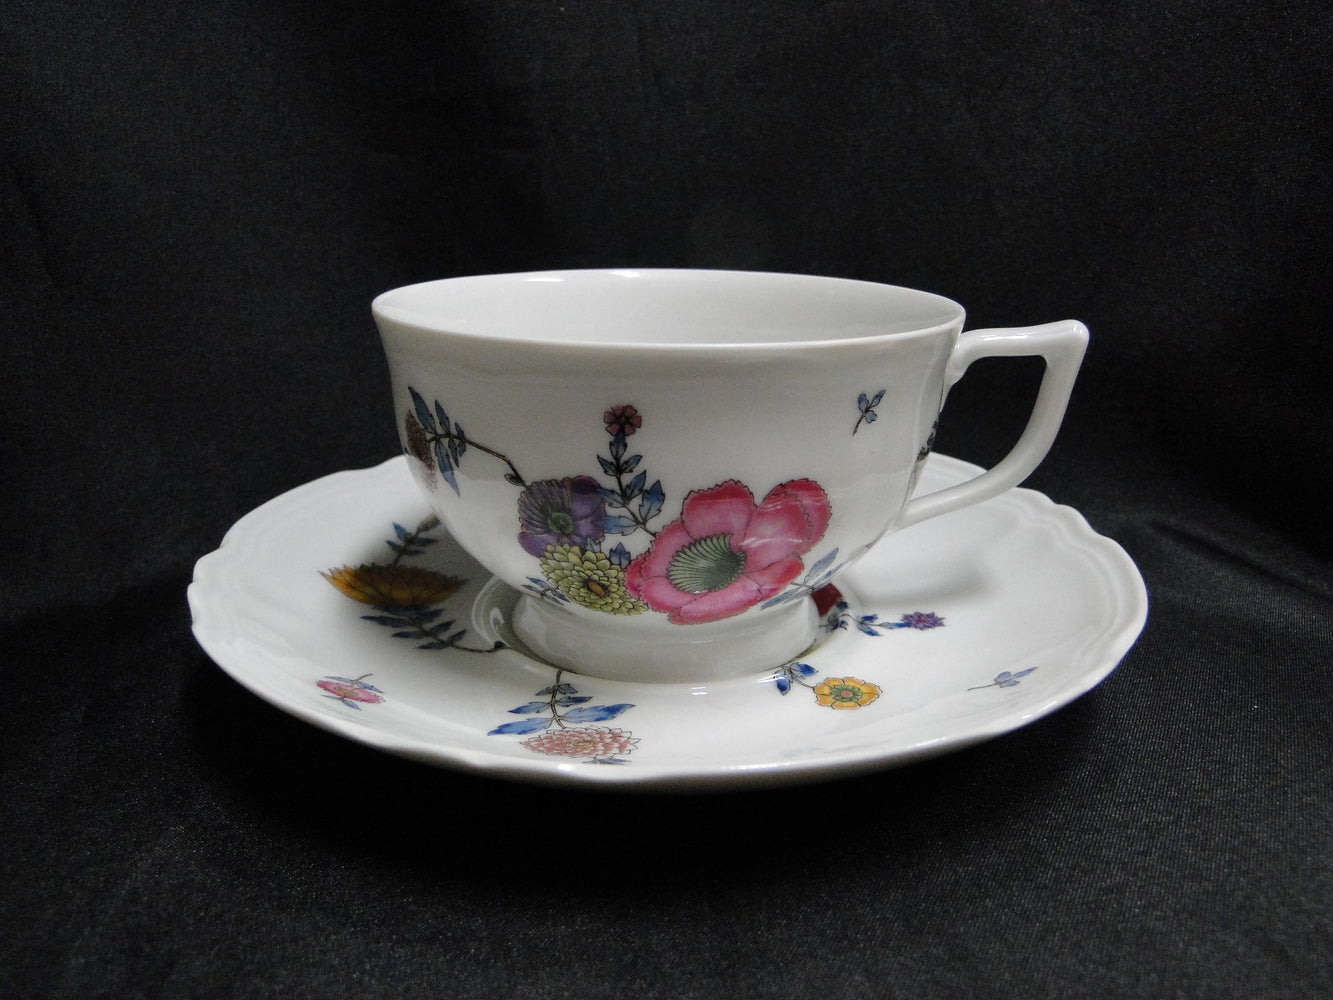 Raynaud Ceralene Anemones, Multicolored Flowers: Cup & Saucer Set, As Is